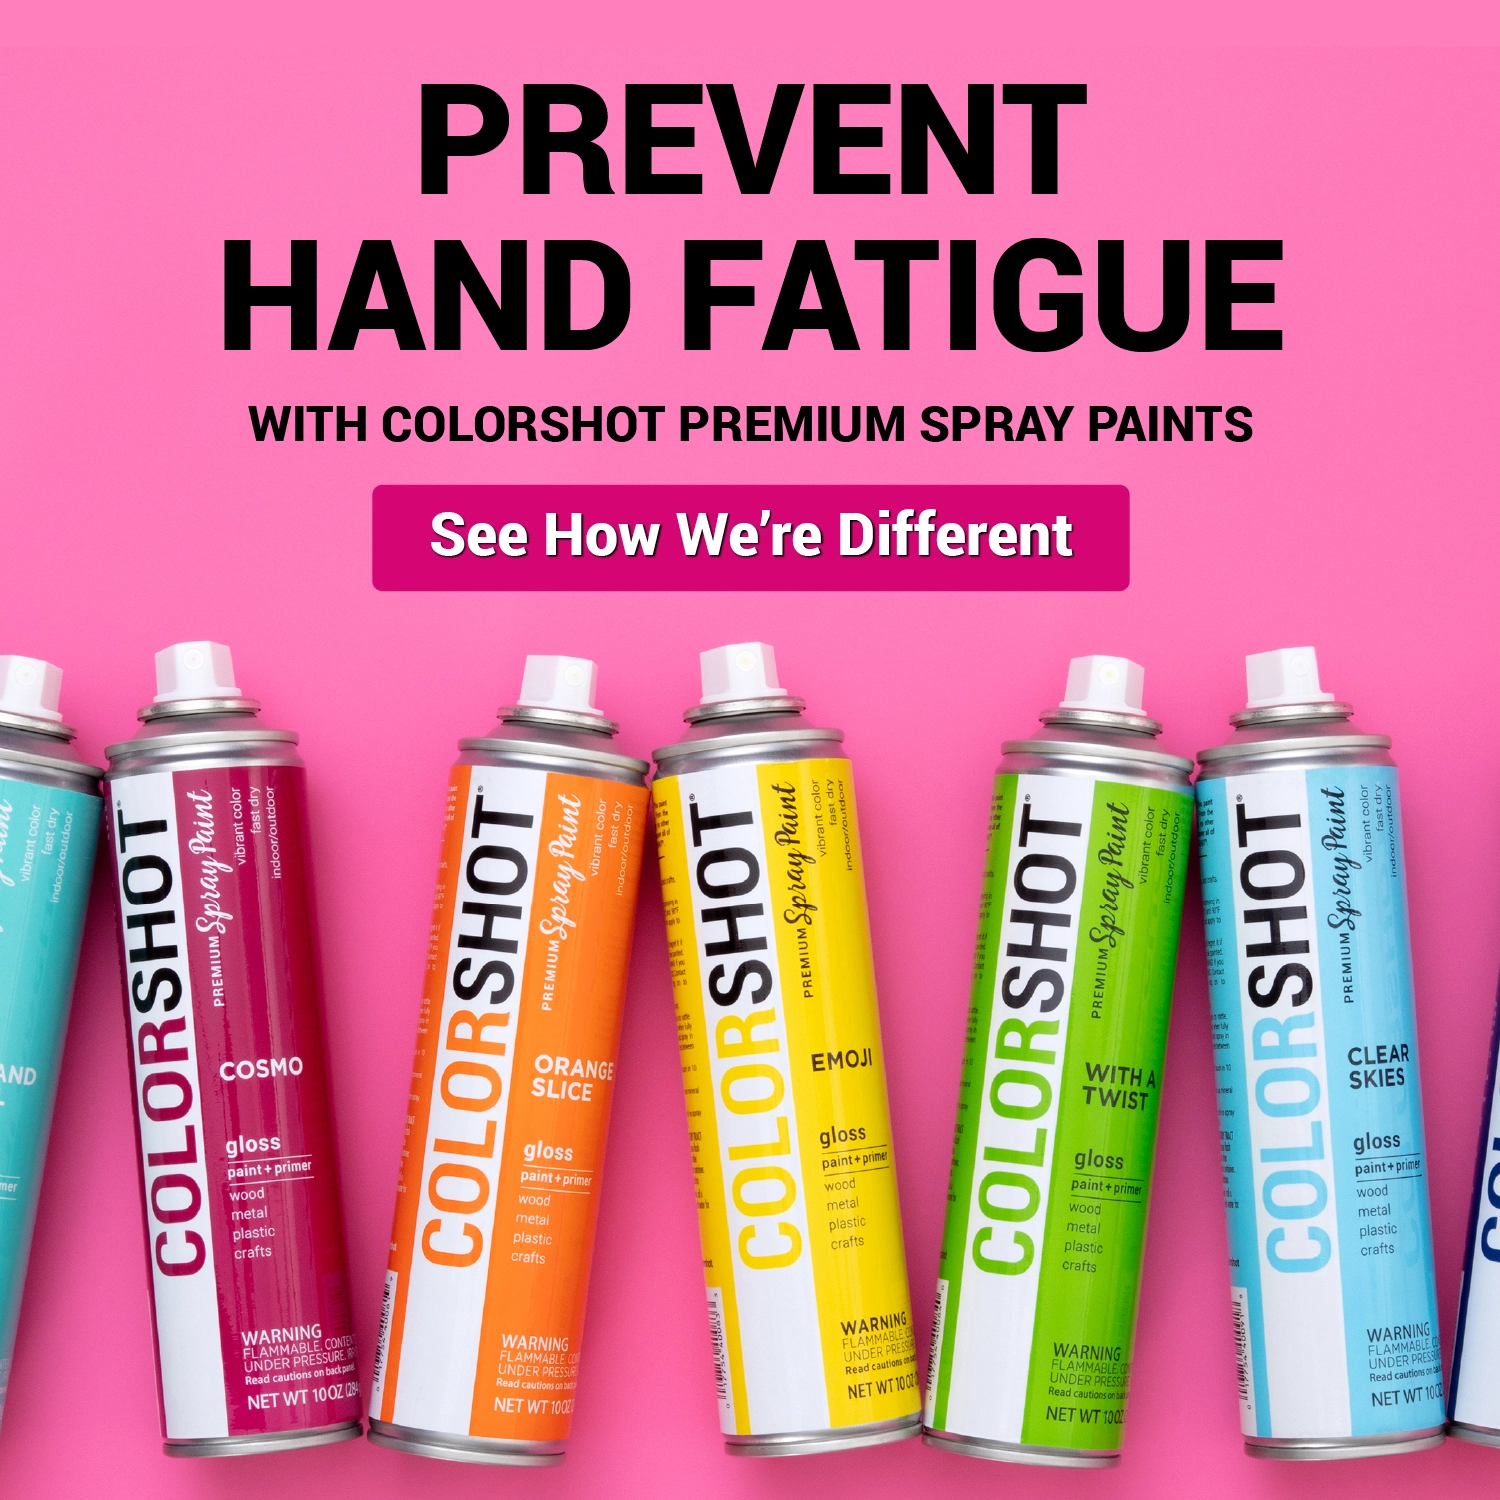 Prevent hand fatigue with COLORSHOT